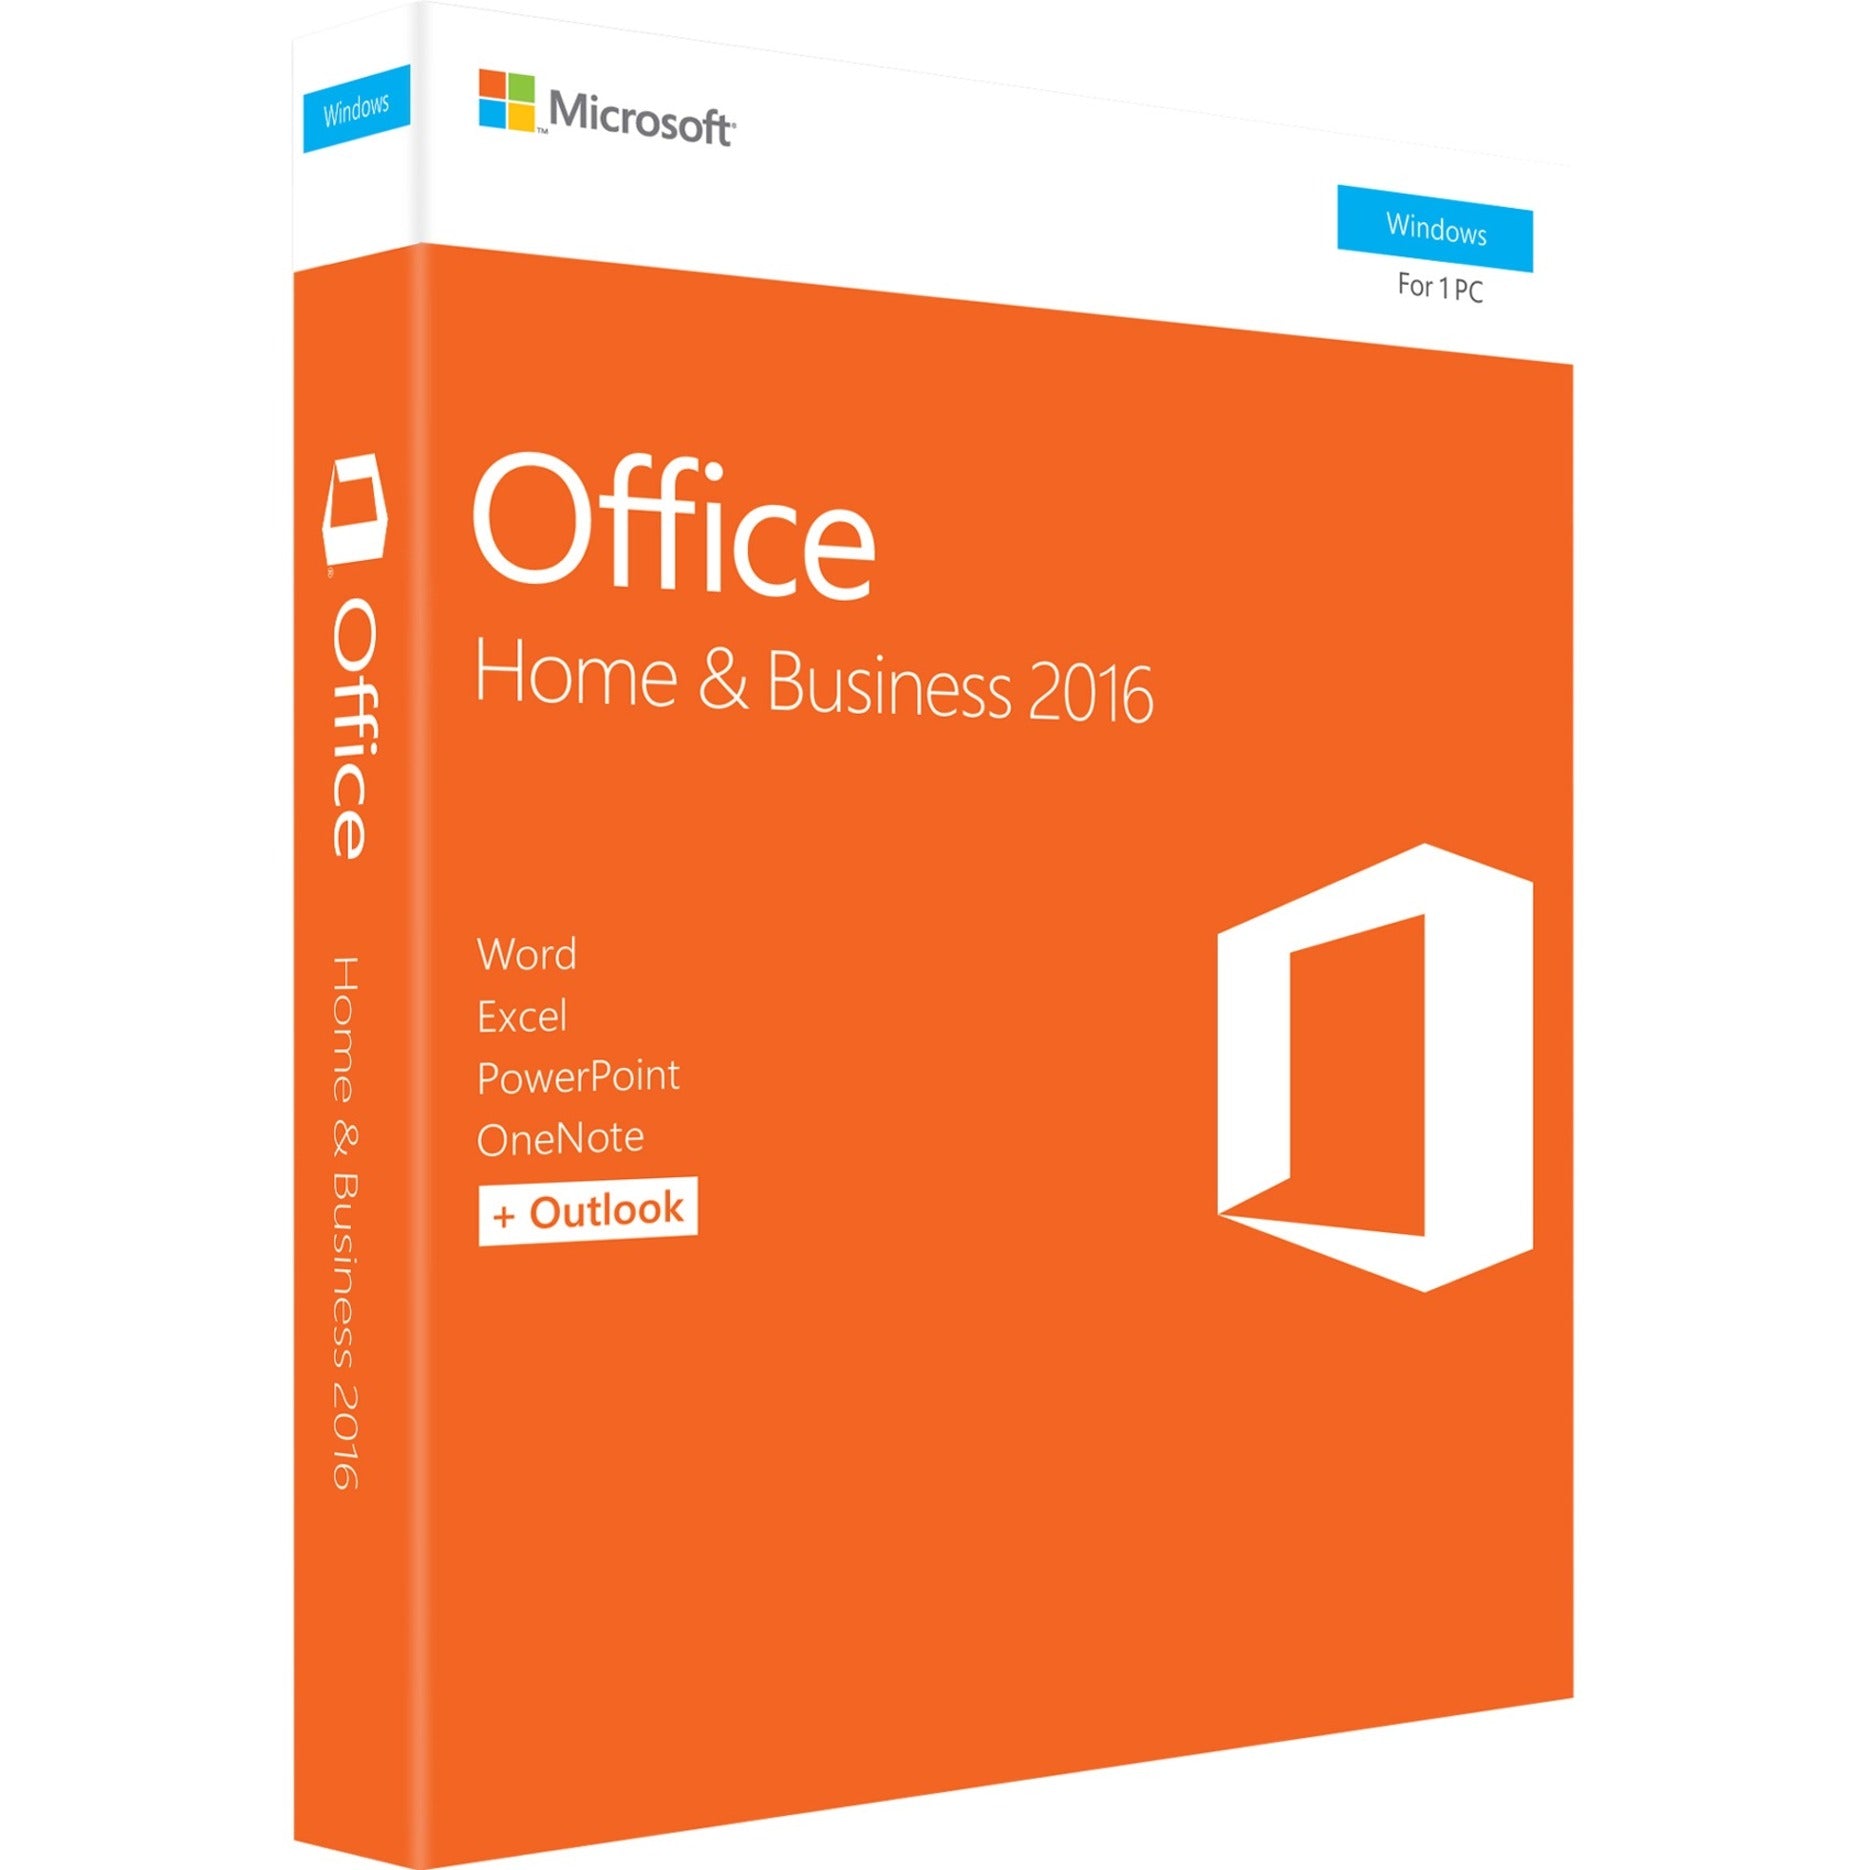 Microsoft T5D-02776 Office 2016 Home & Business Software Suite